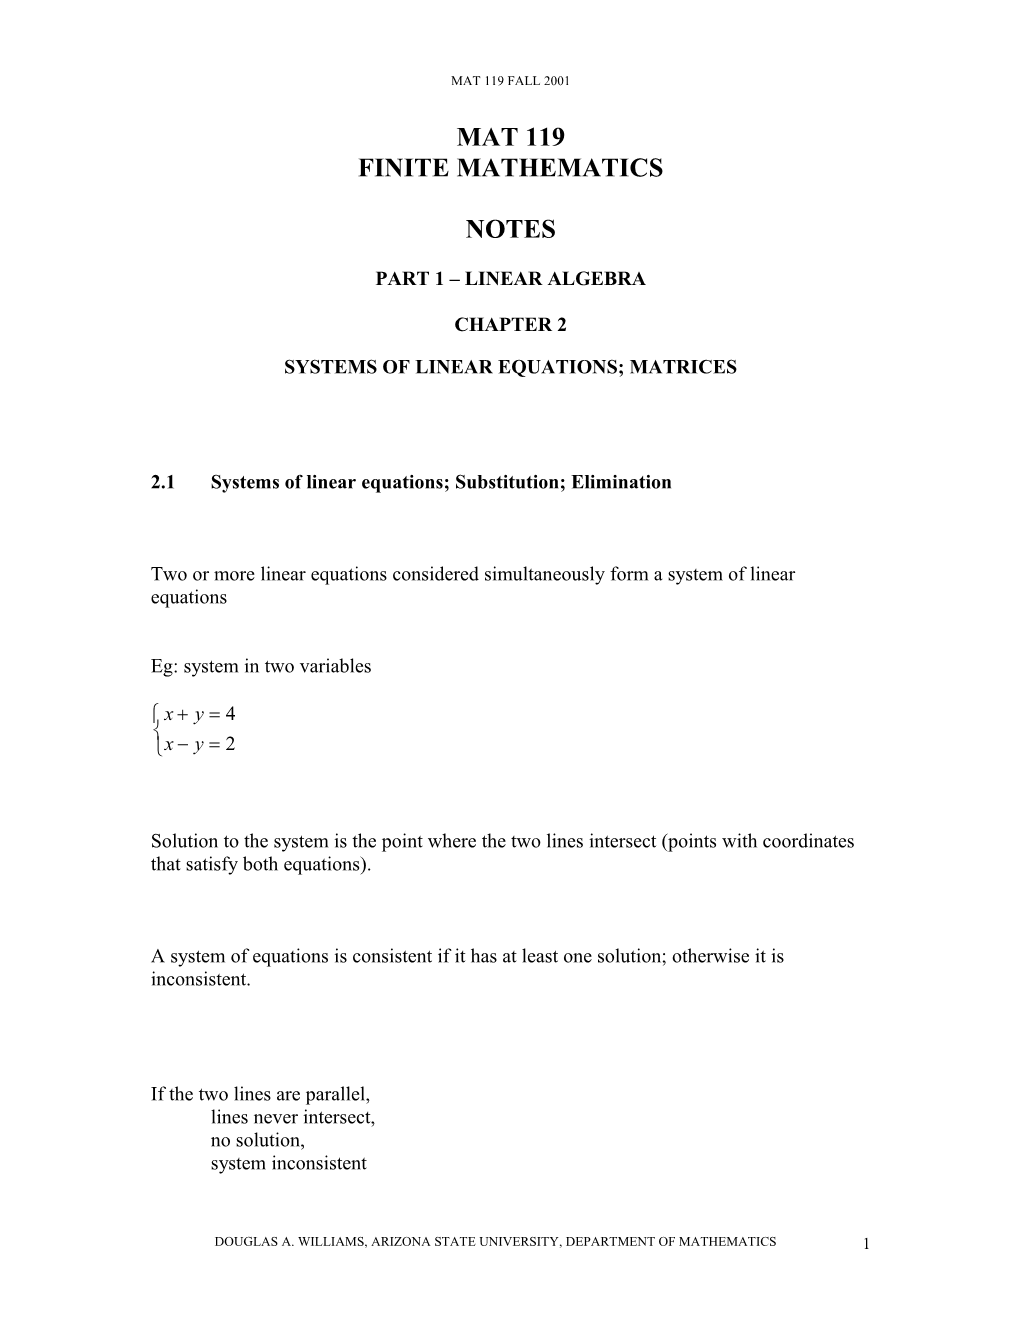 Systems of Linear Equations; Matrices